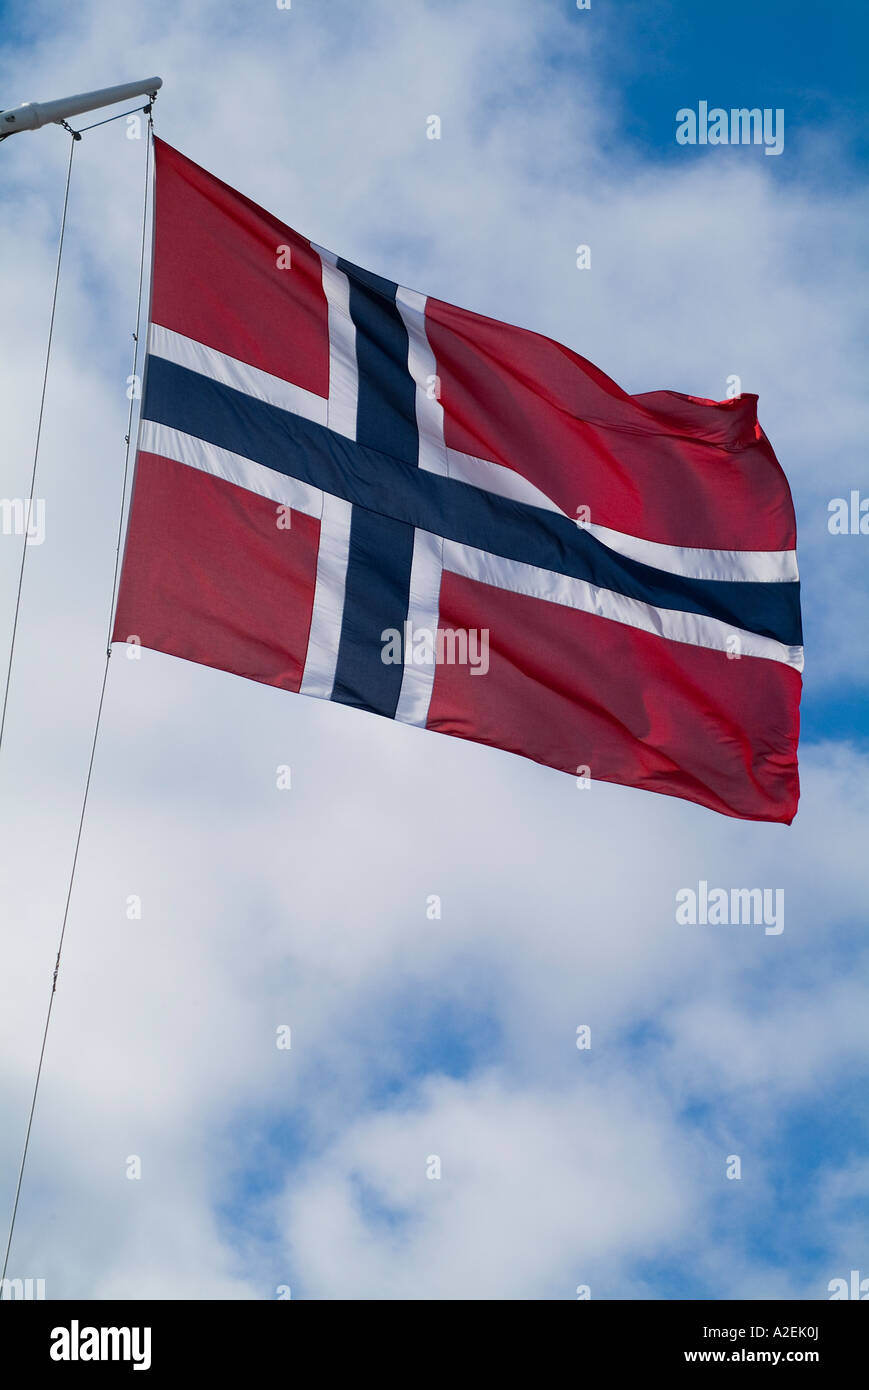 dh Norwegian flag FLAG NORWAY On board sailing ship Ensign ships standard Stock Photo